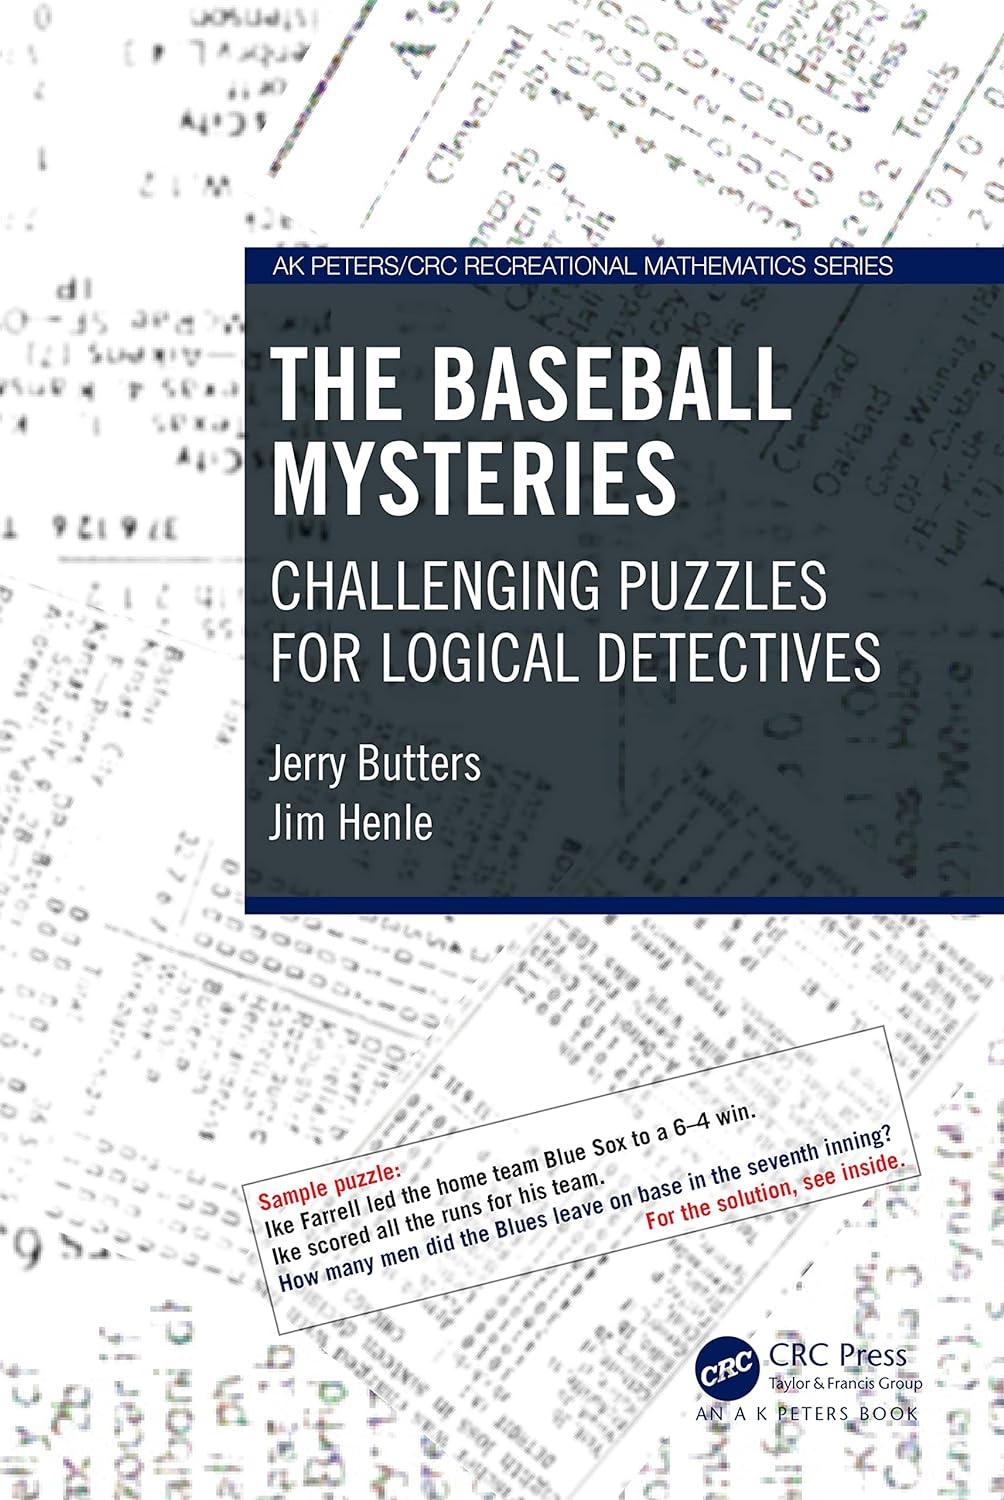 the baseball mysteries ak peters crc recreational mathematics series 1st edition jerry butters, jim henle